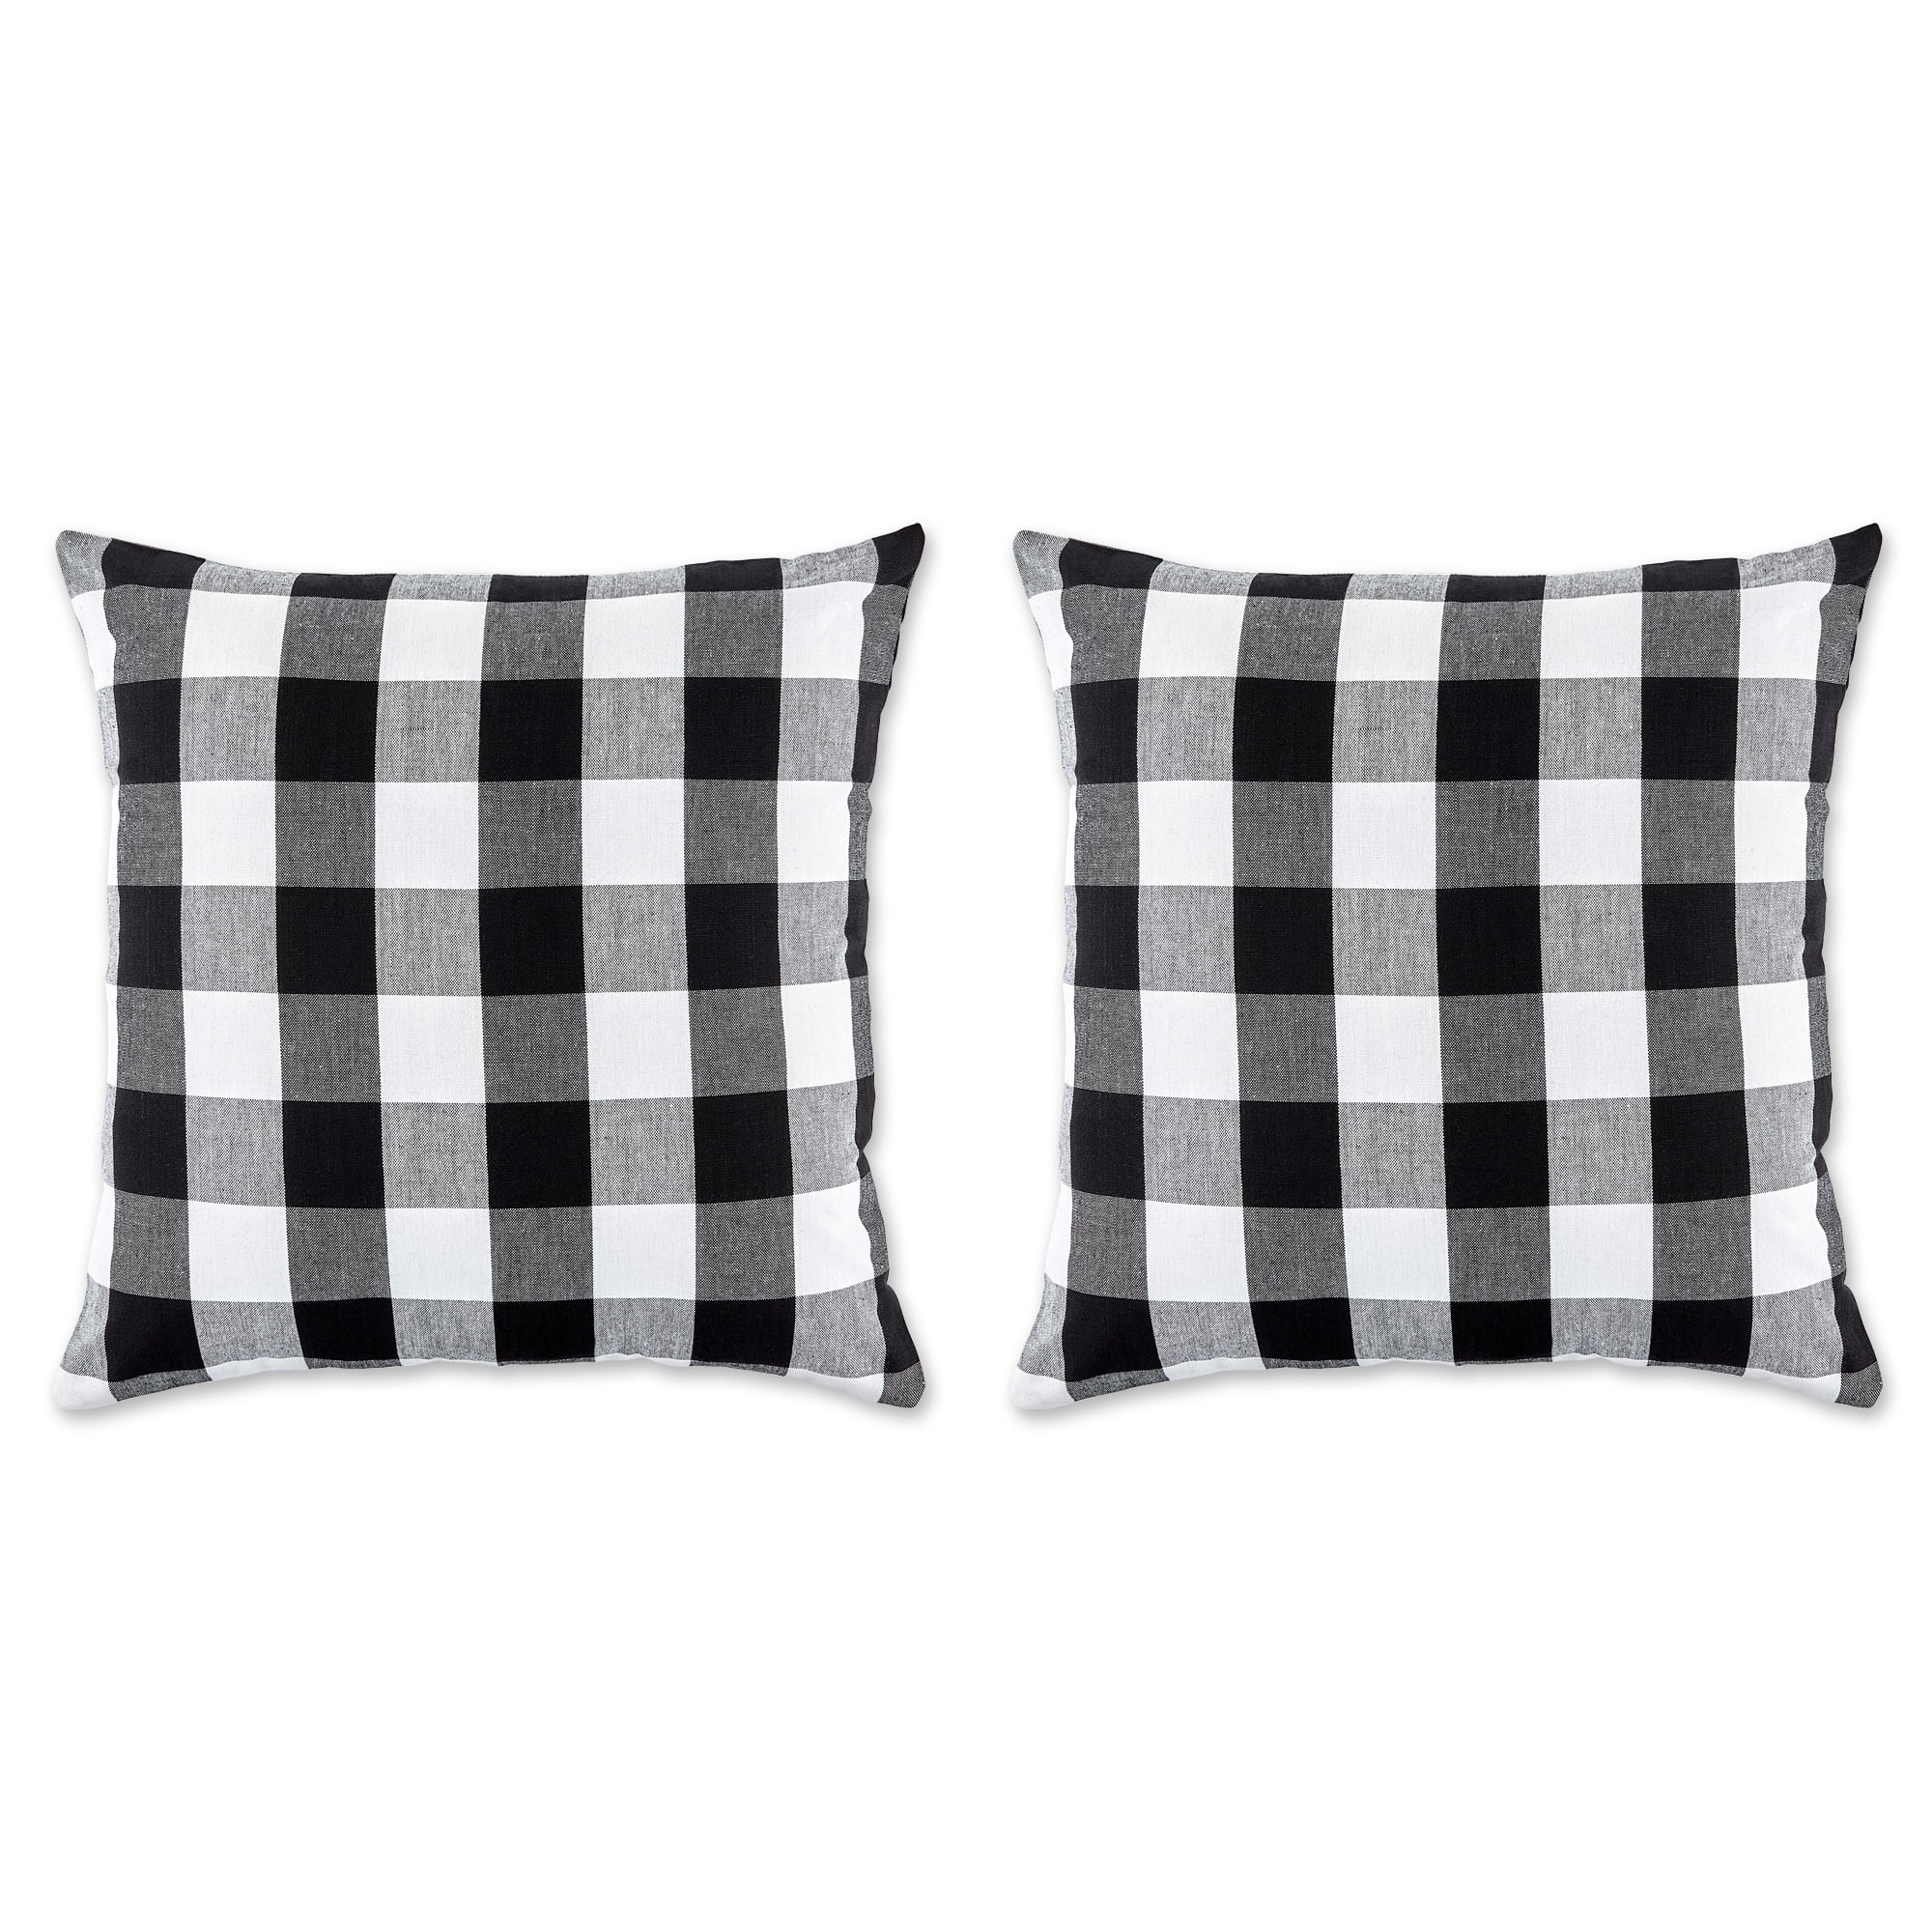 black pillow covers